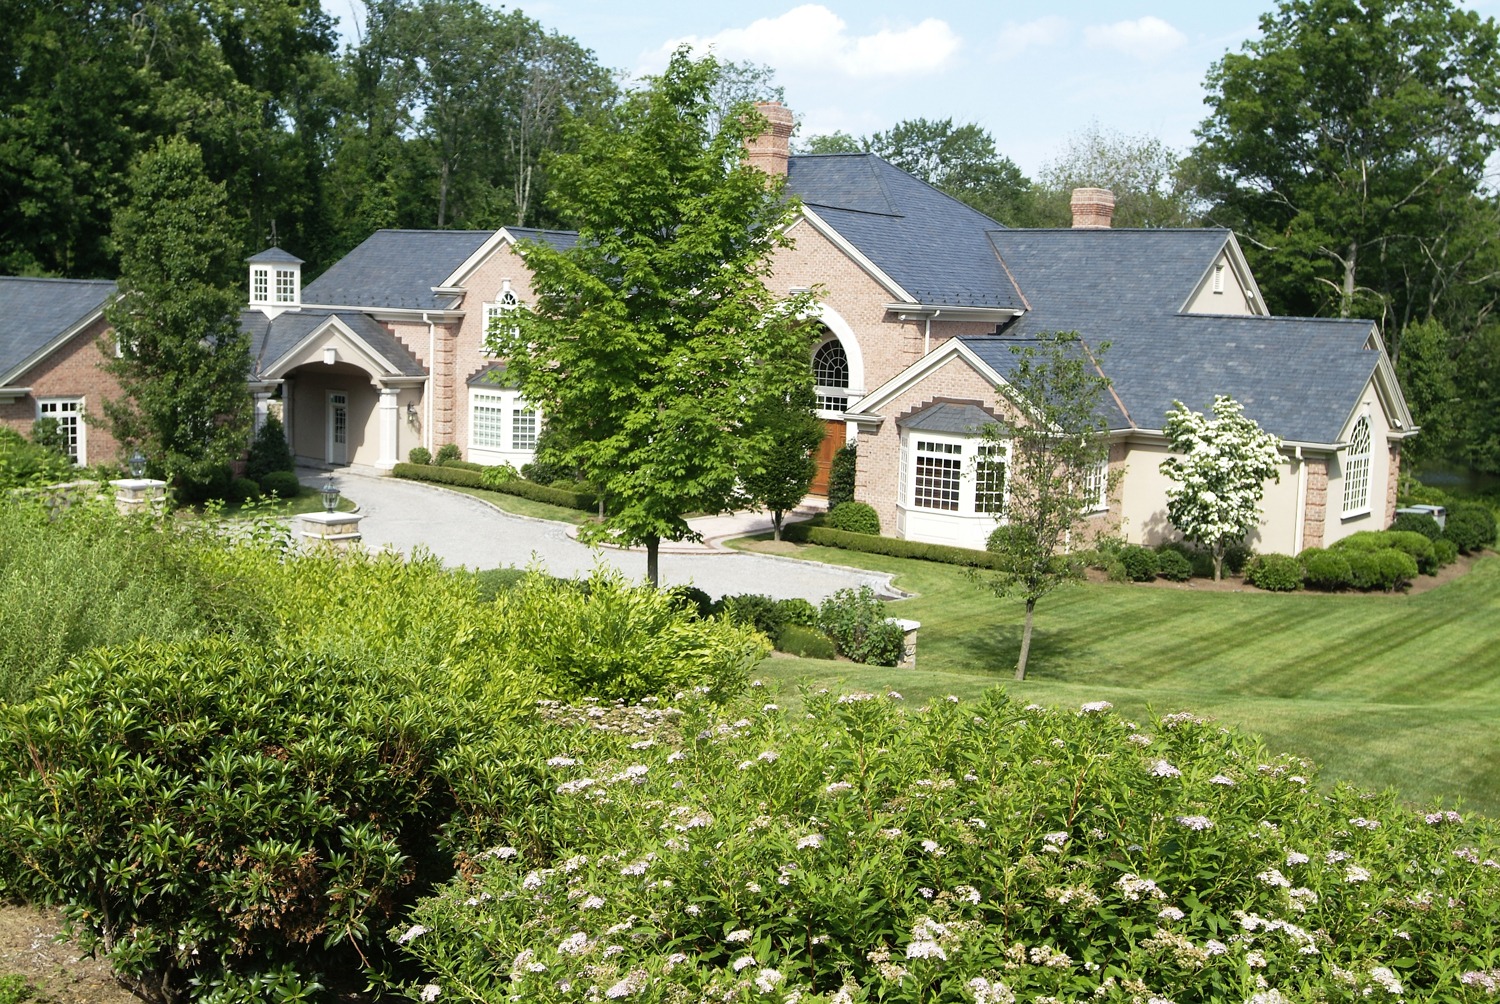 An expansive brick house with several chimneys and gables, lush landscaping, a manicured lawn, and a winding driveway in a sunny setting.